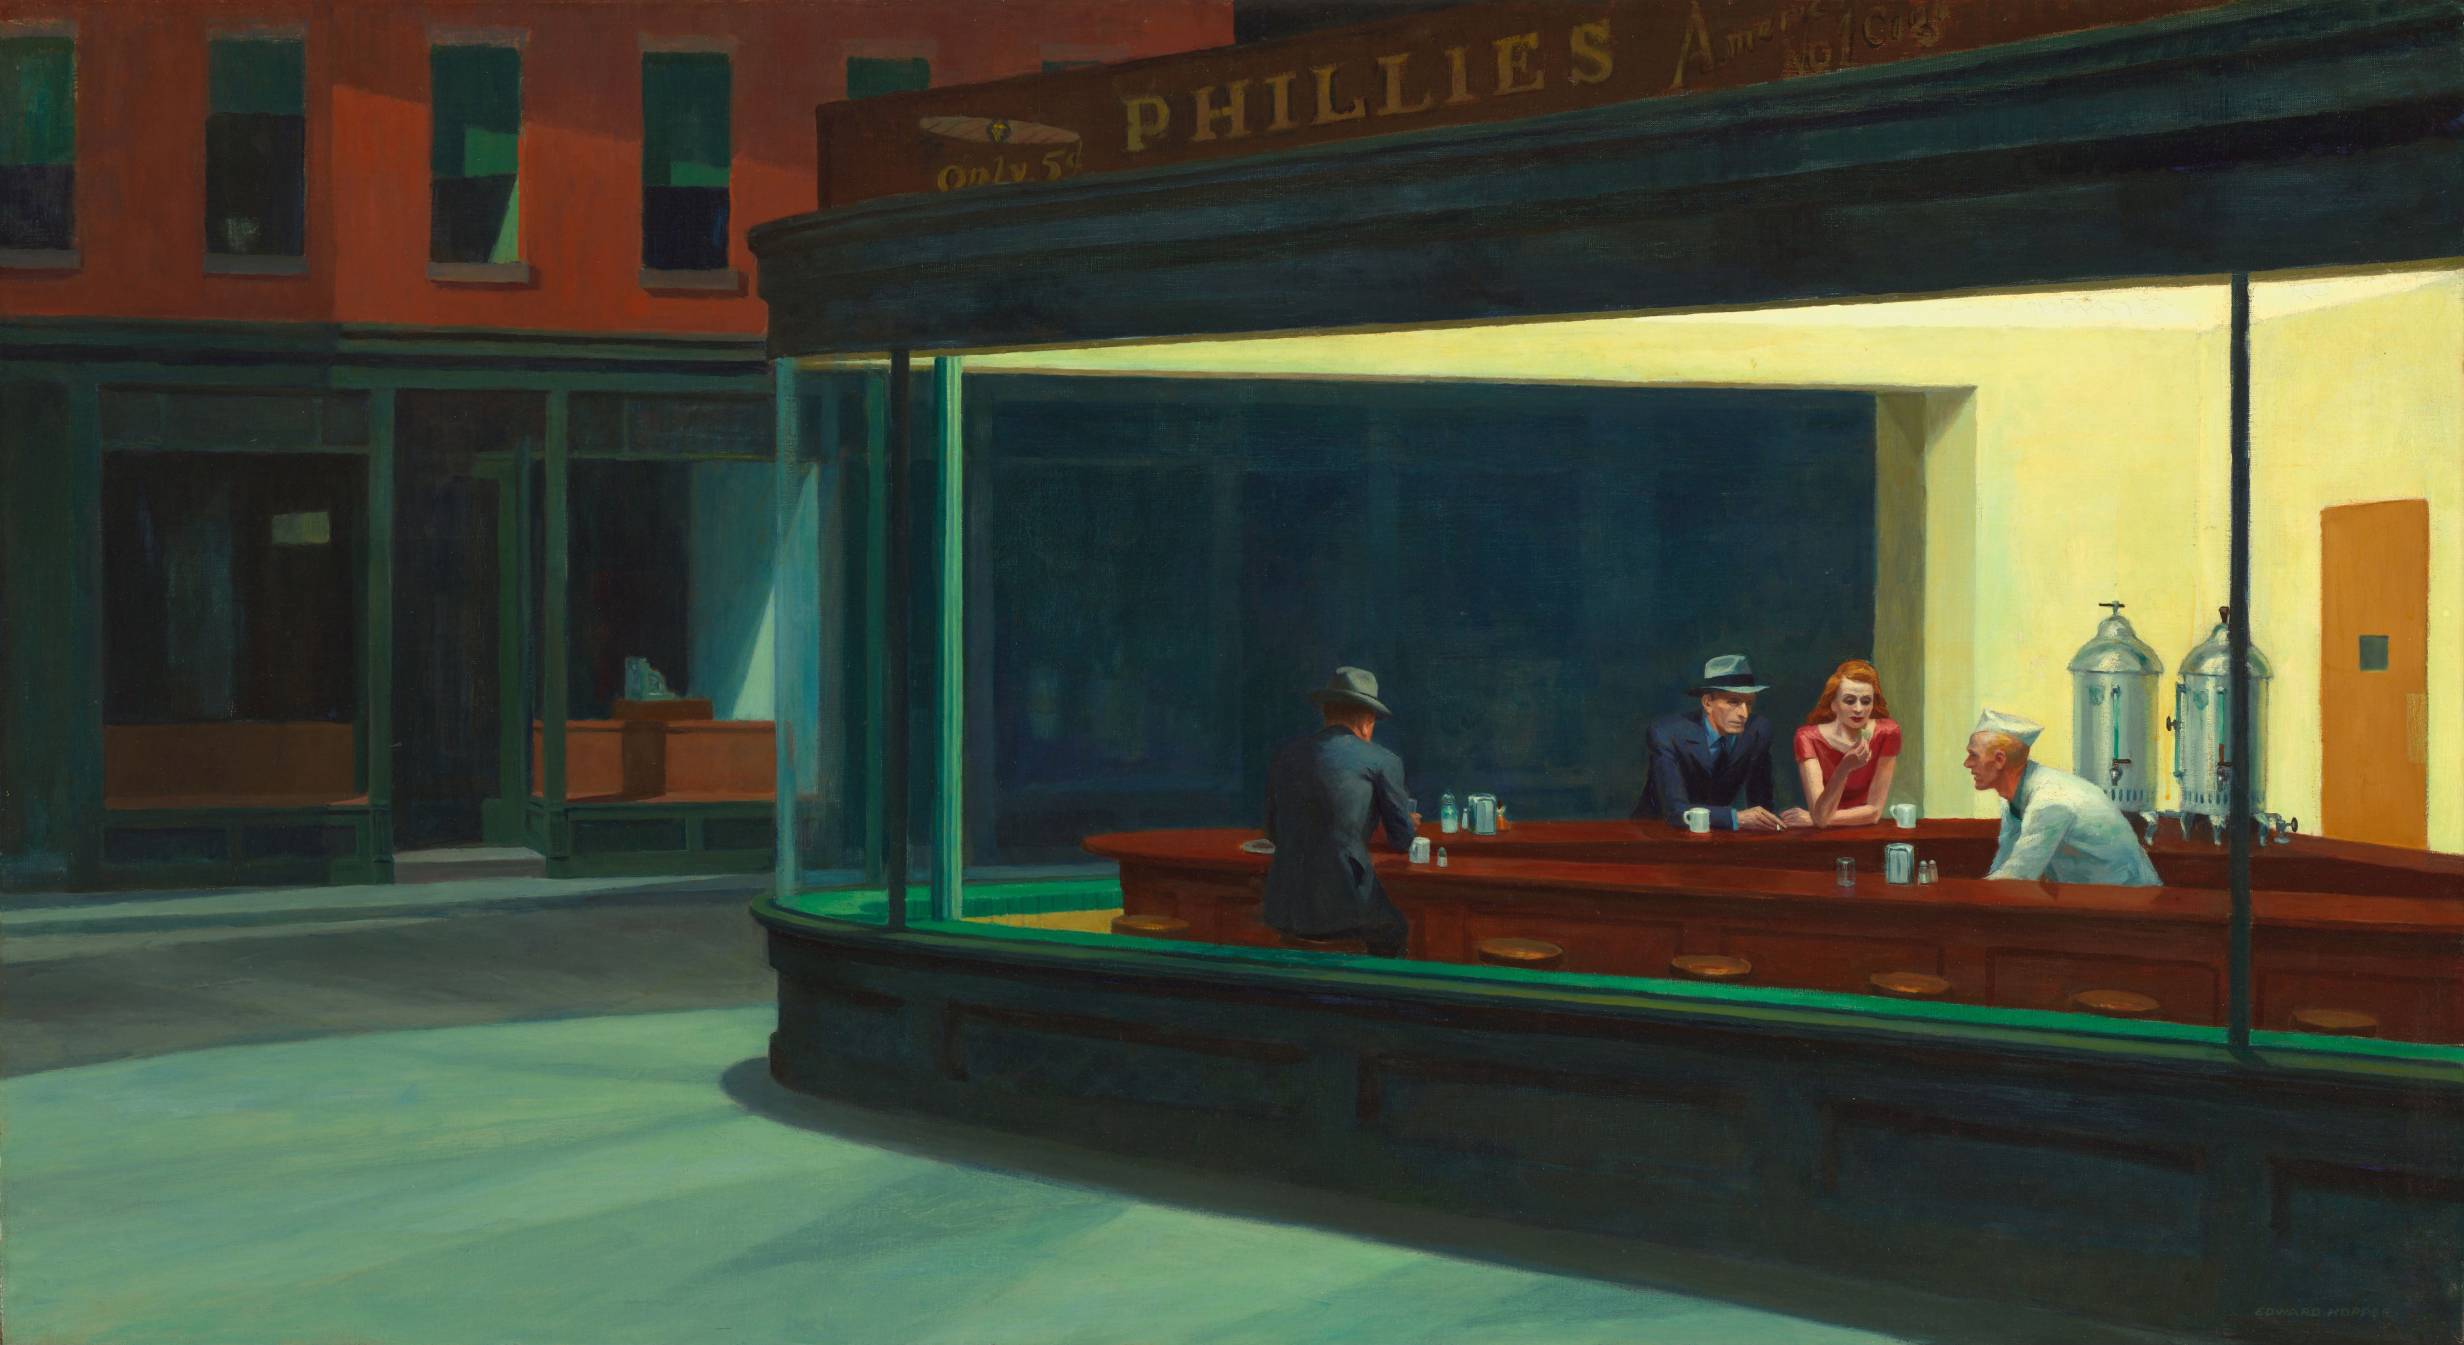 Nighthawks at the diner: Merry Ann’s is a real life Hopper painting